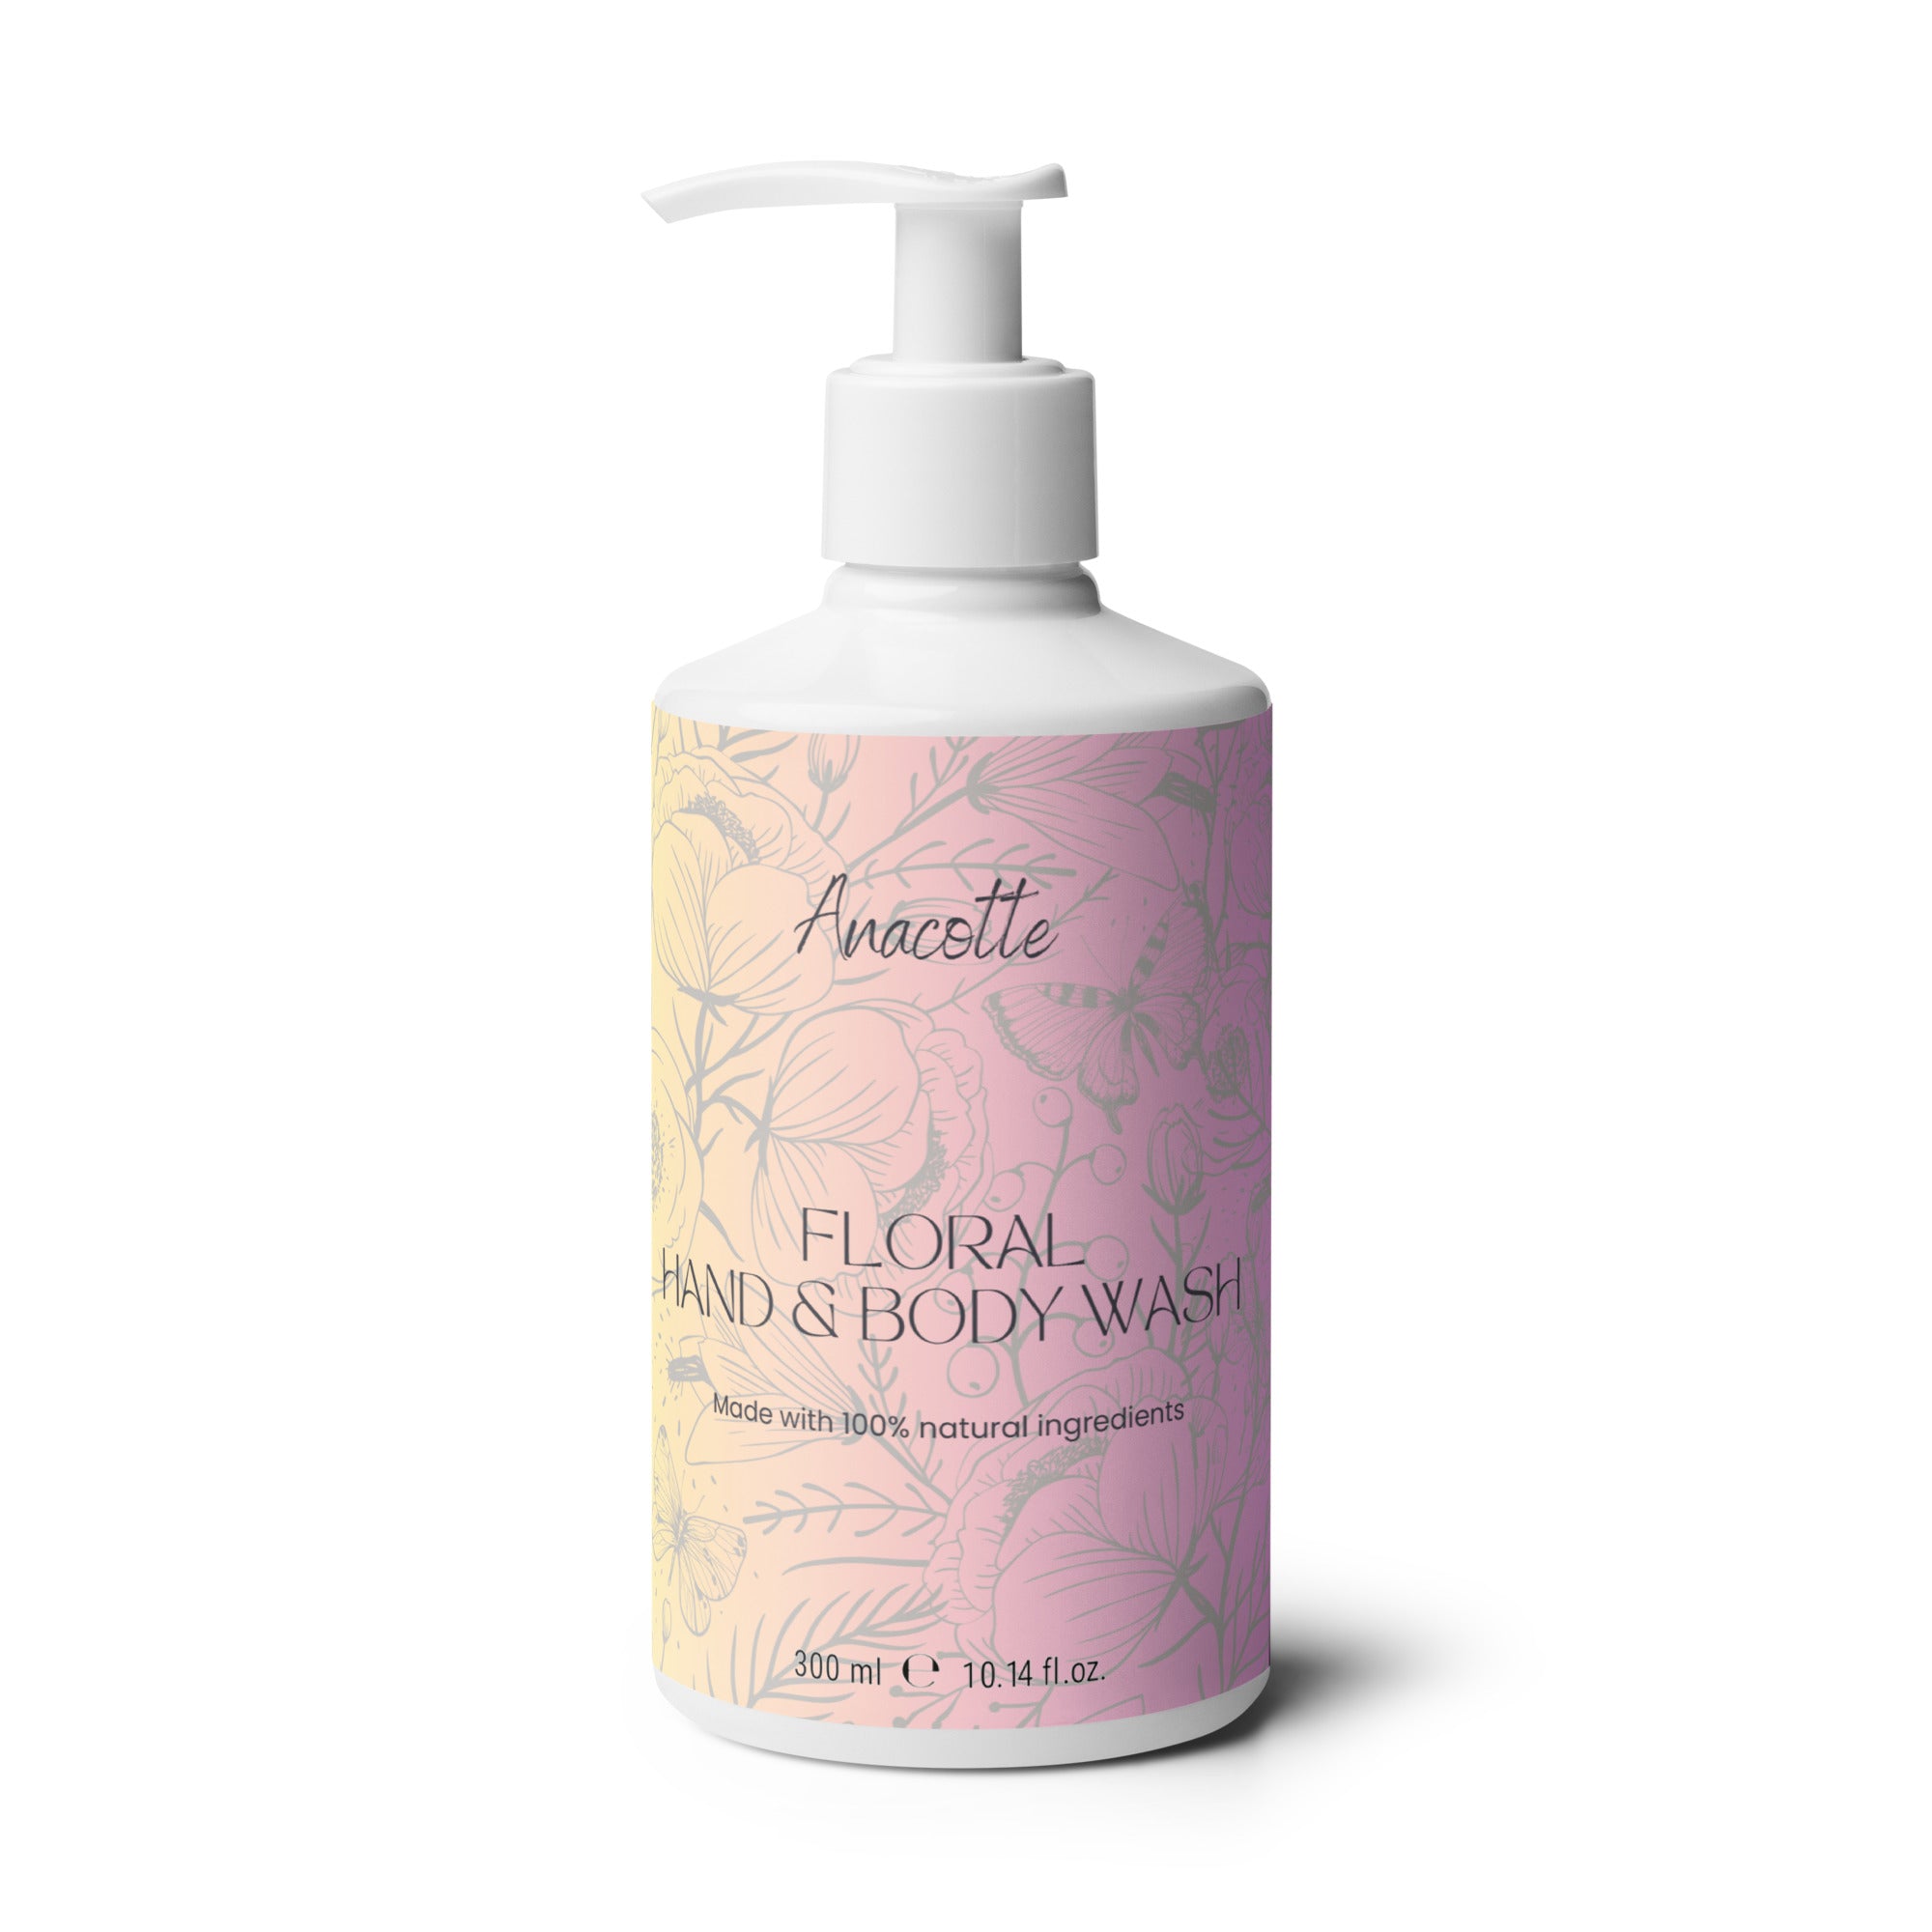 Anacotte Floral Fusion Hand & Body Wash